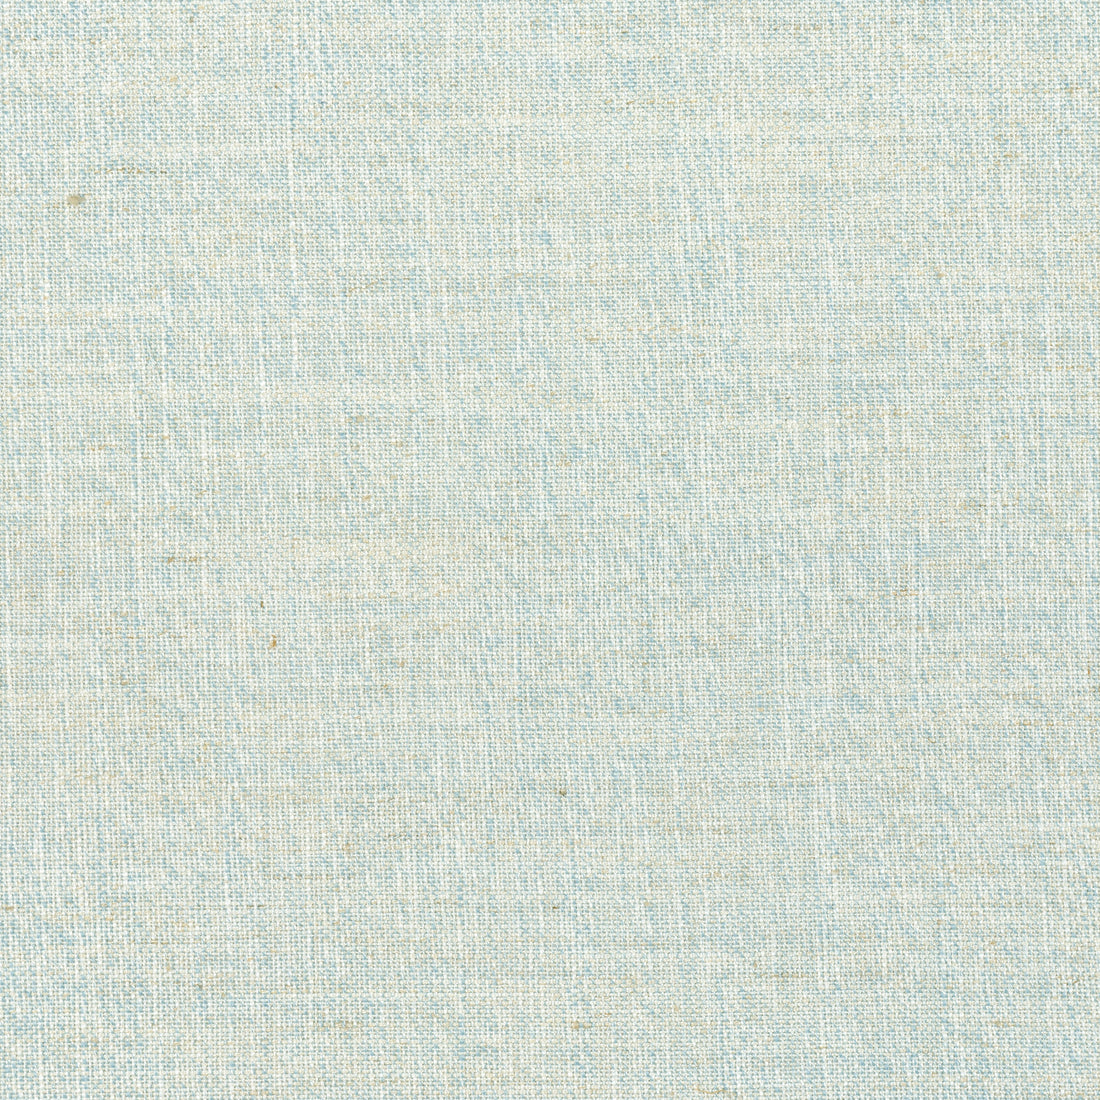 Terra Linen fabric in bluebell color - pattern number FWW7682 - by Thibaut in the Palisades collection